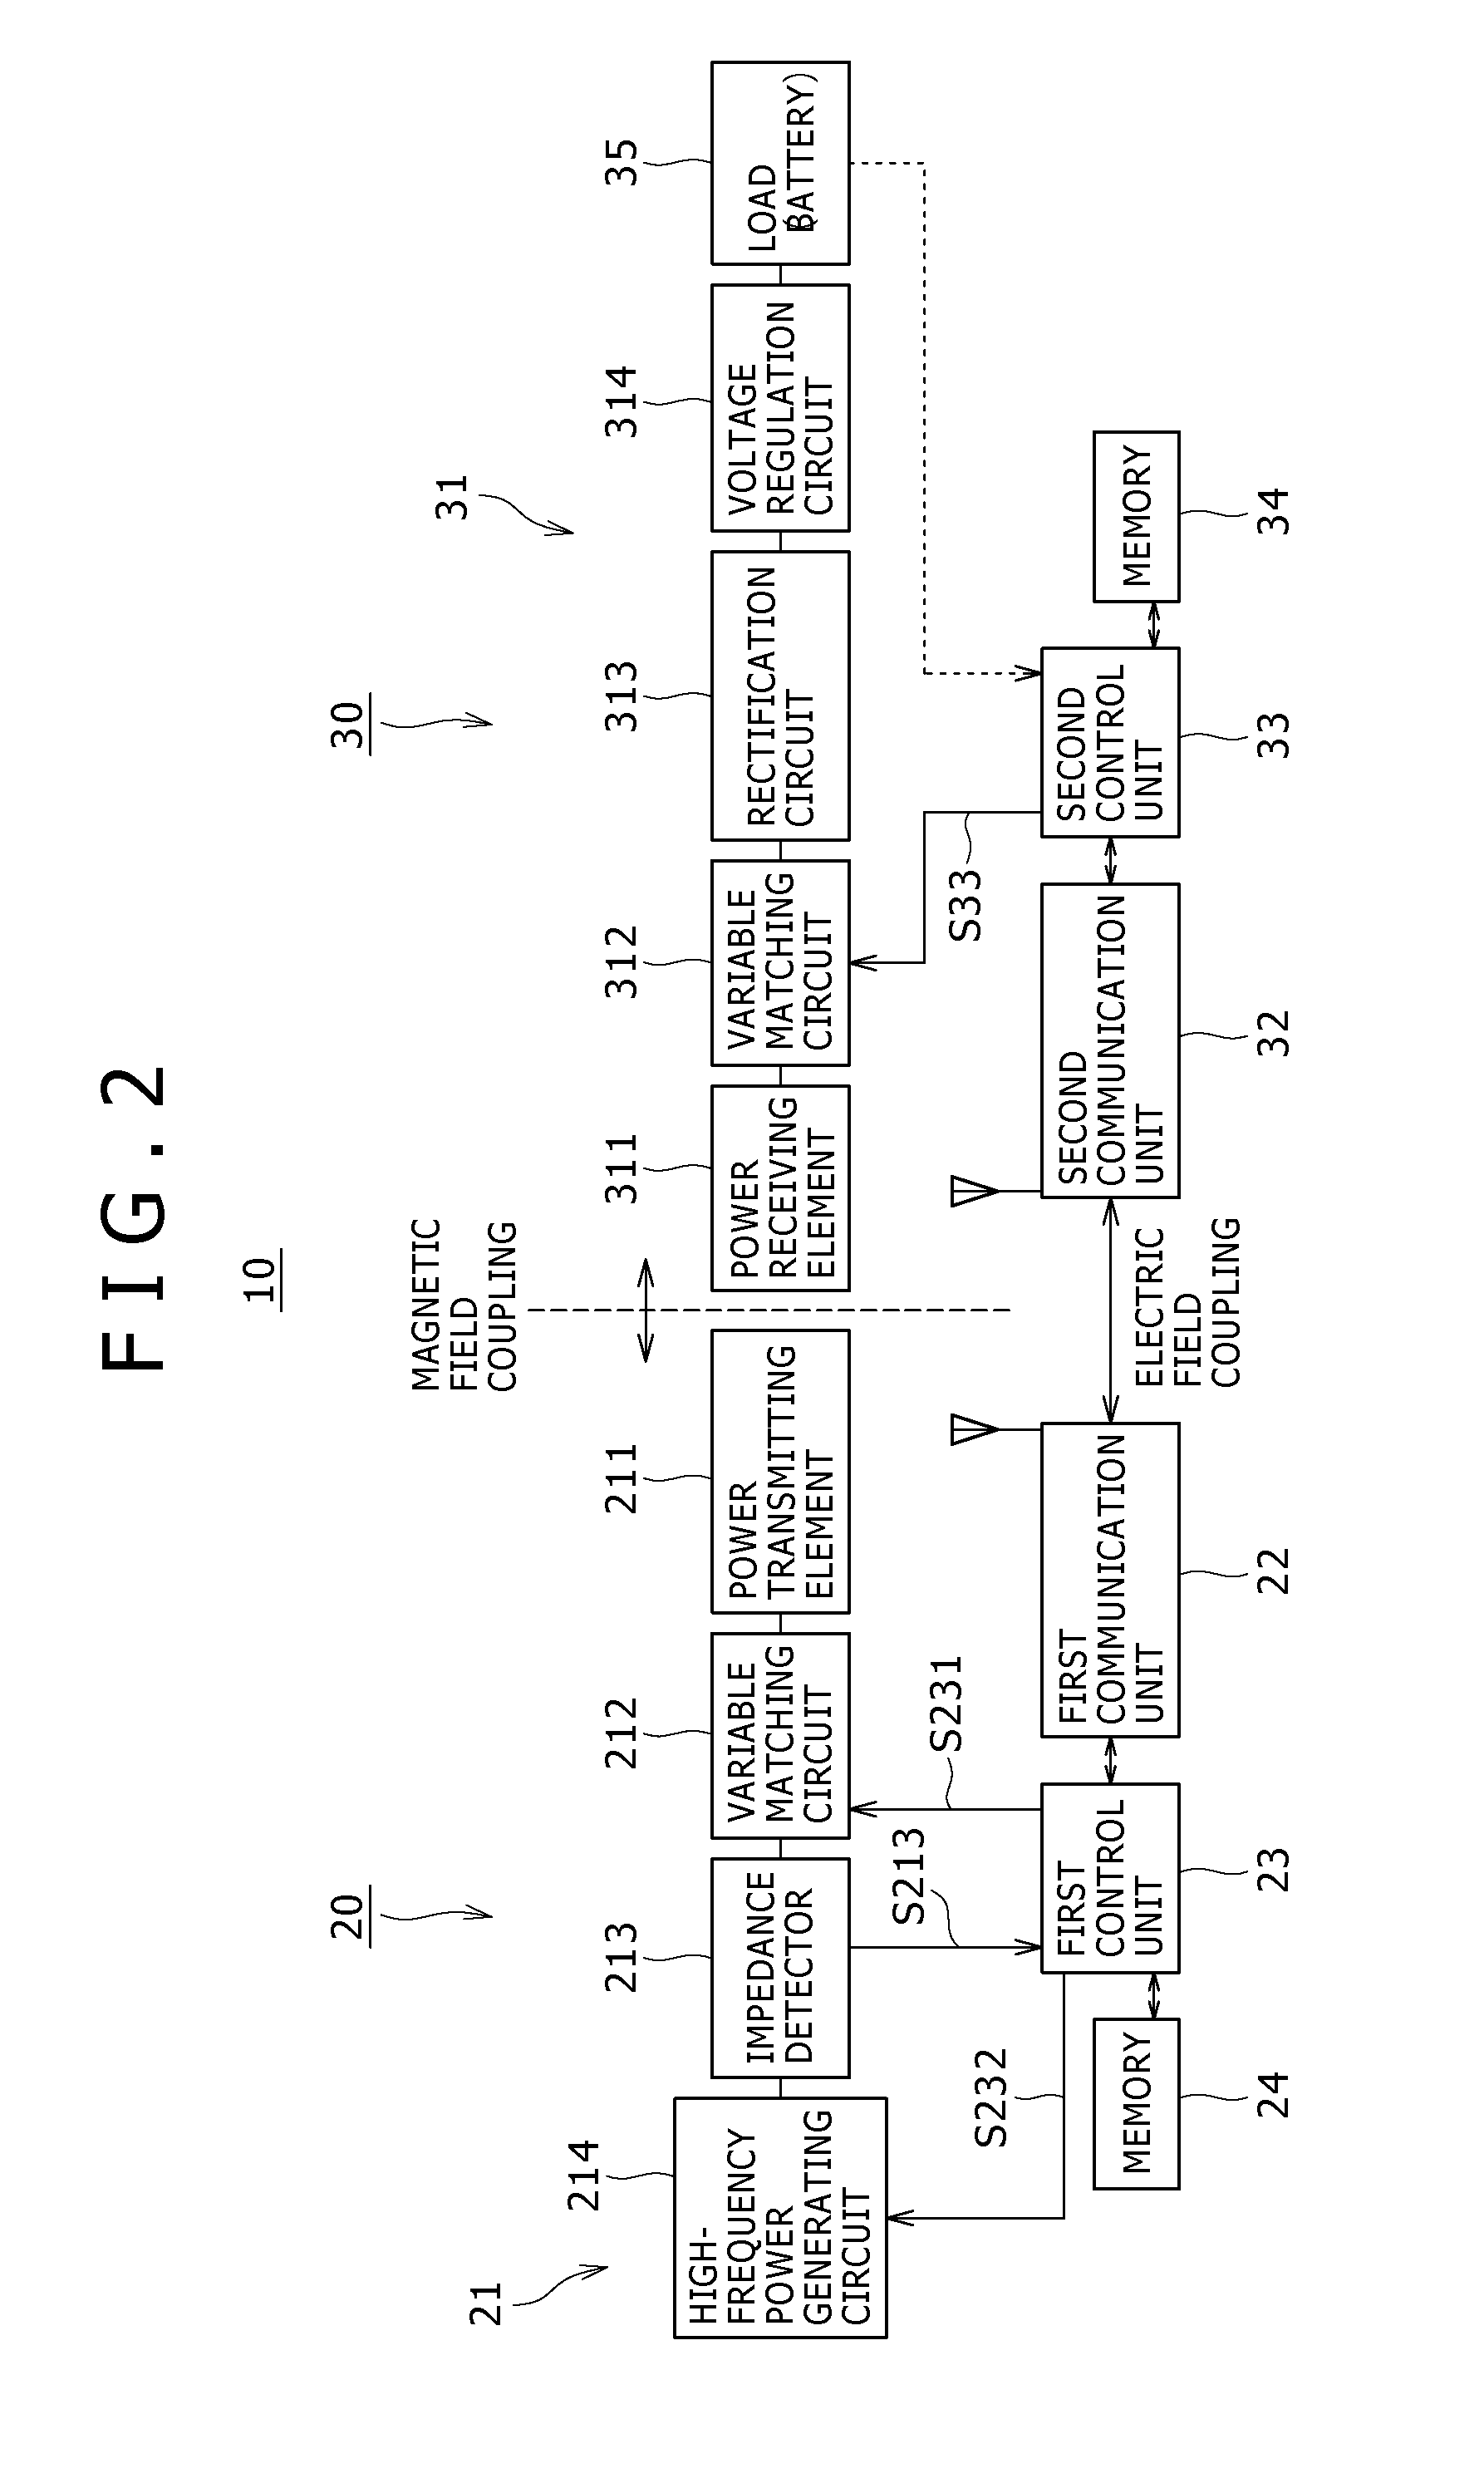 Non-contact charge and communication system